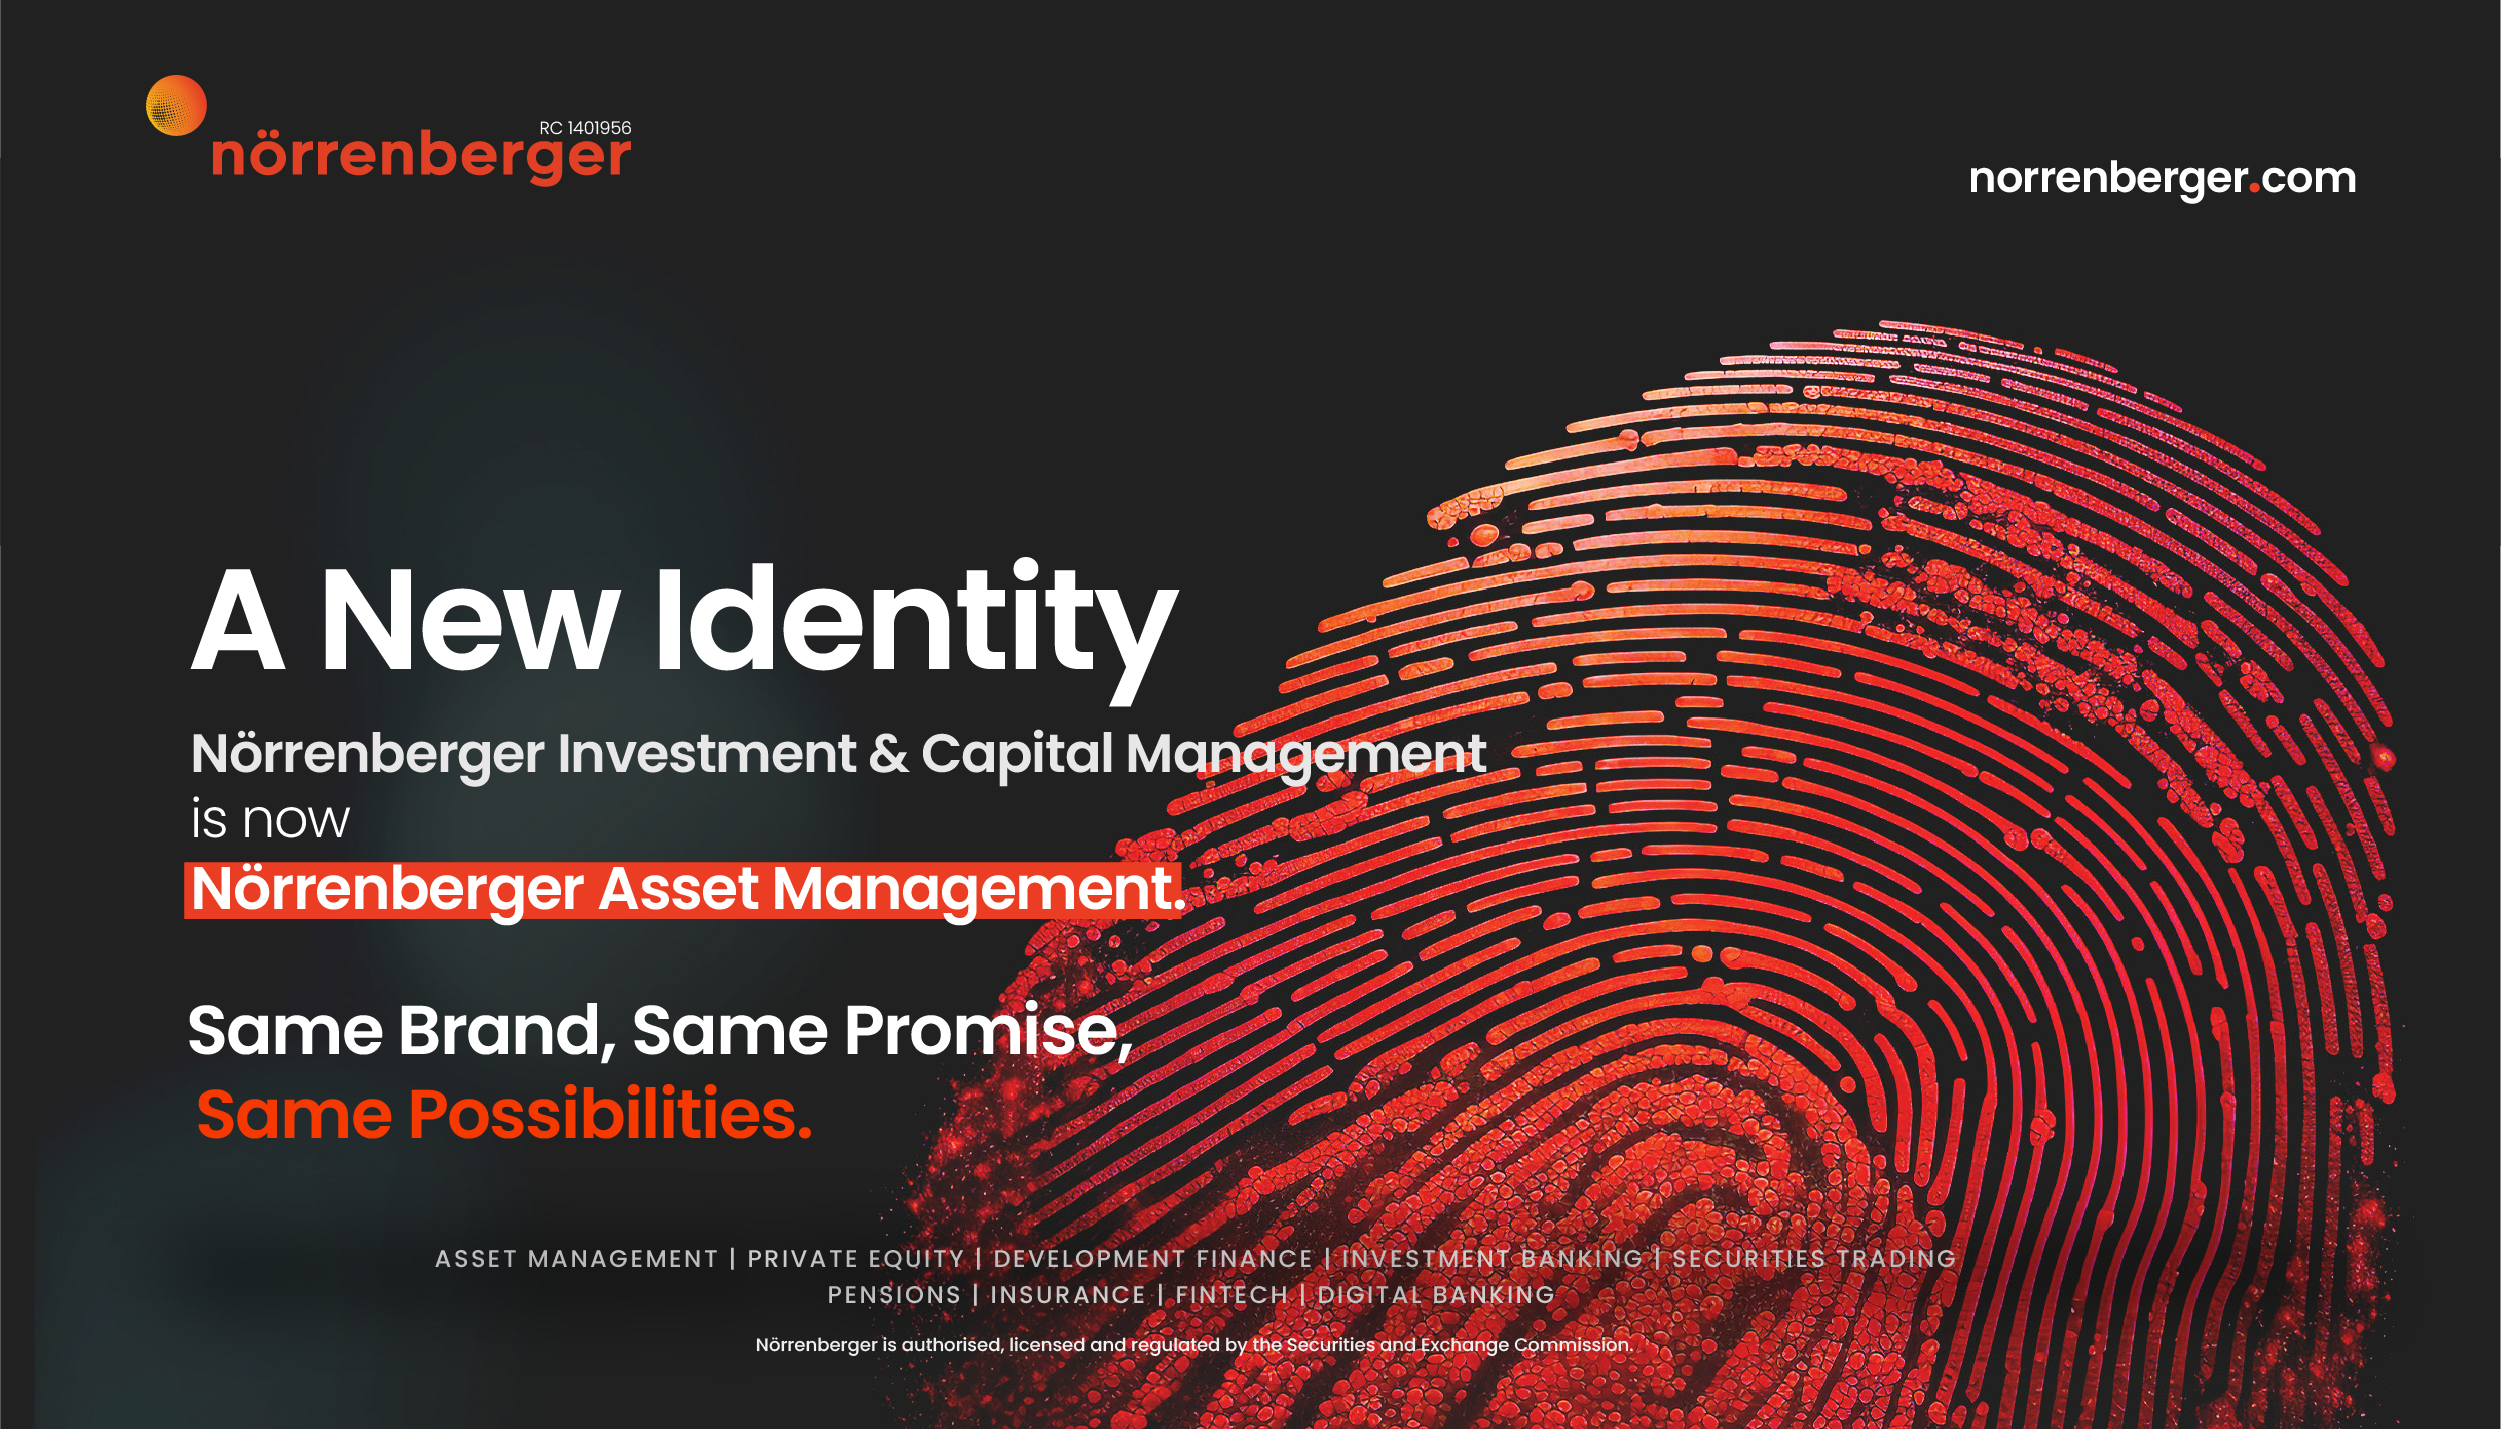 Change of Name: Norrenberger Investment & Capital Management is now Norrenberger Asset Management